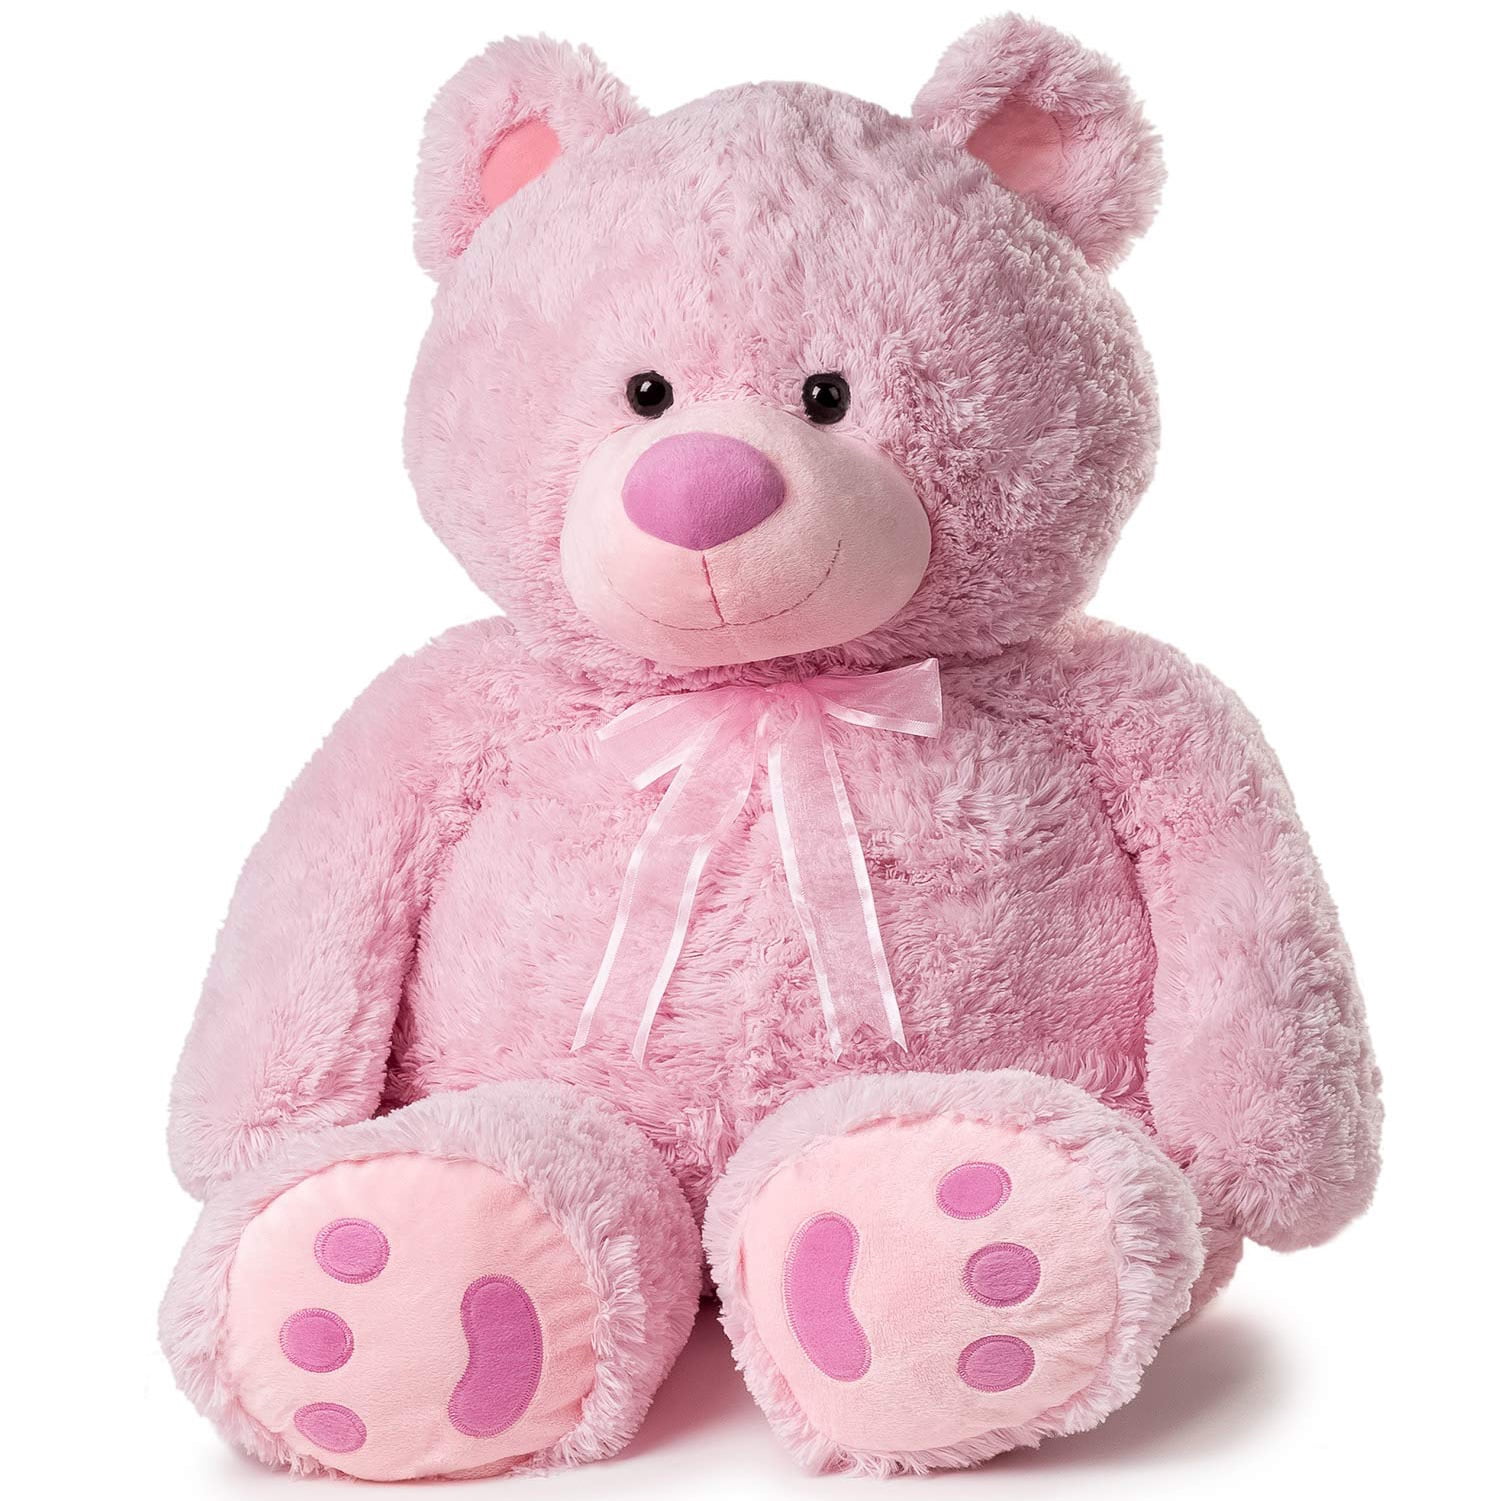 No Sew Kit With Cute Ba Make Your Own Stuffed Animal 16" "Pink Patches Bear" 